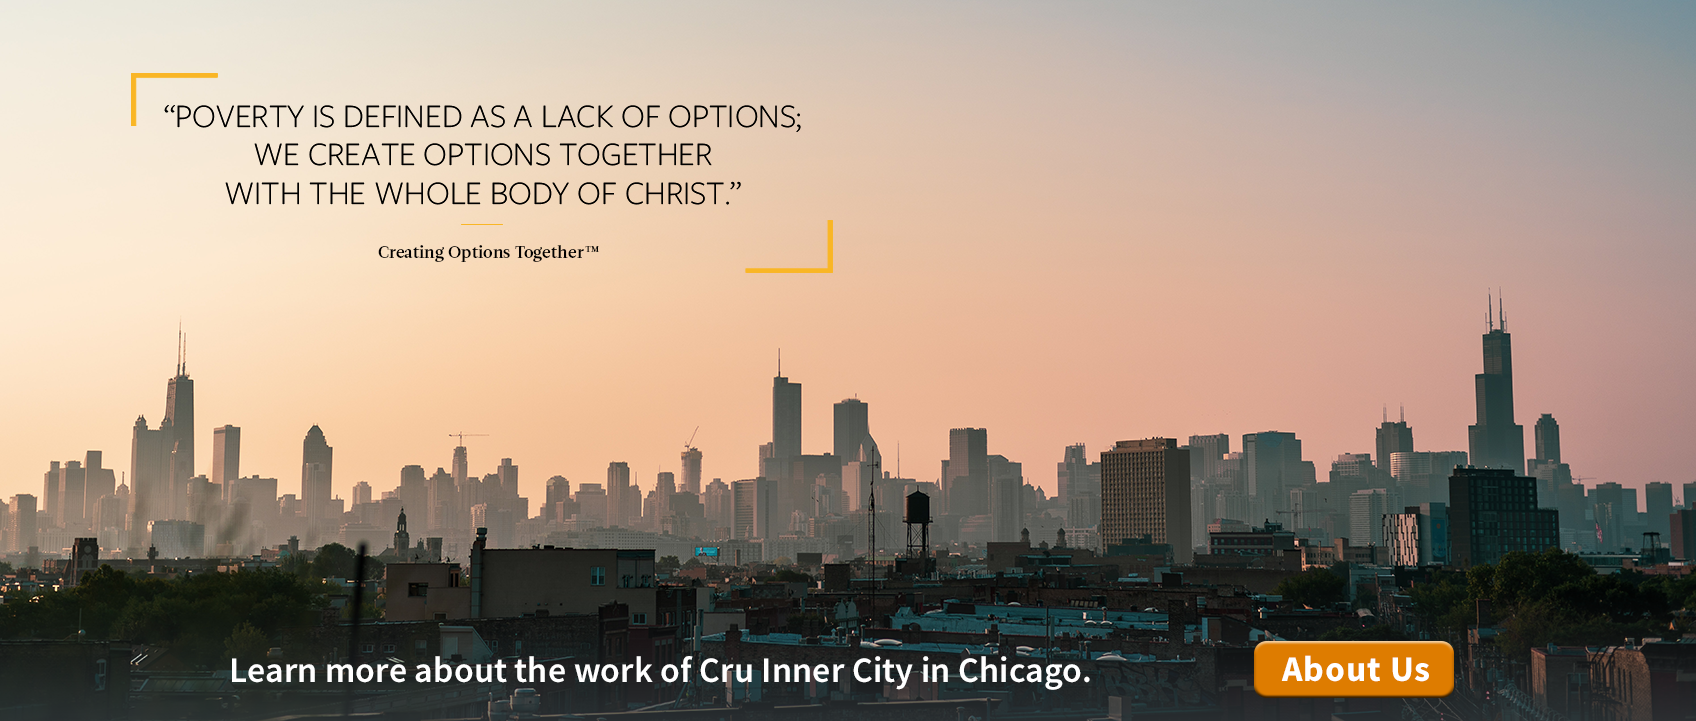 About Cru Inner City in Chicago